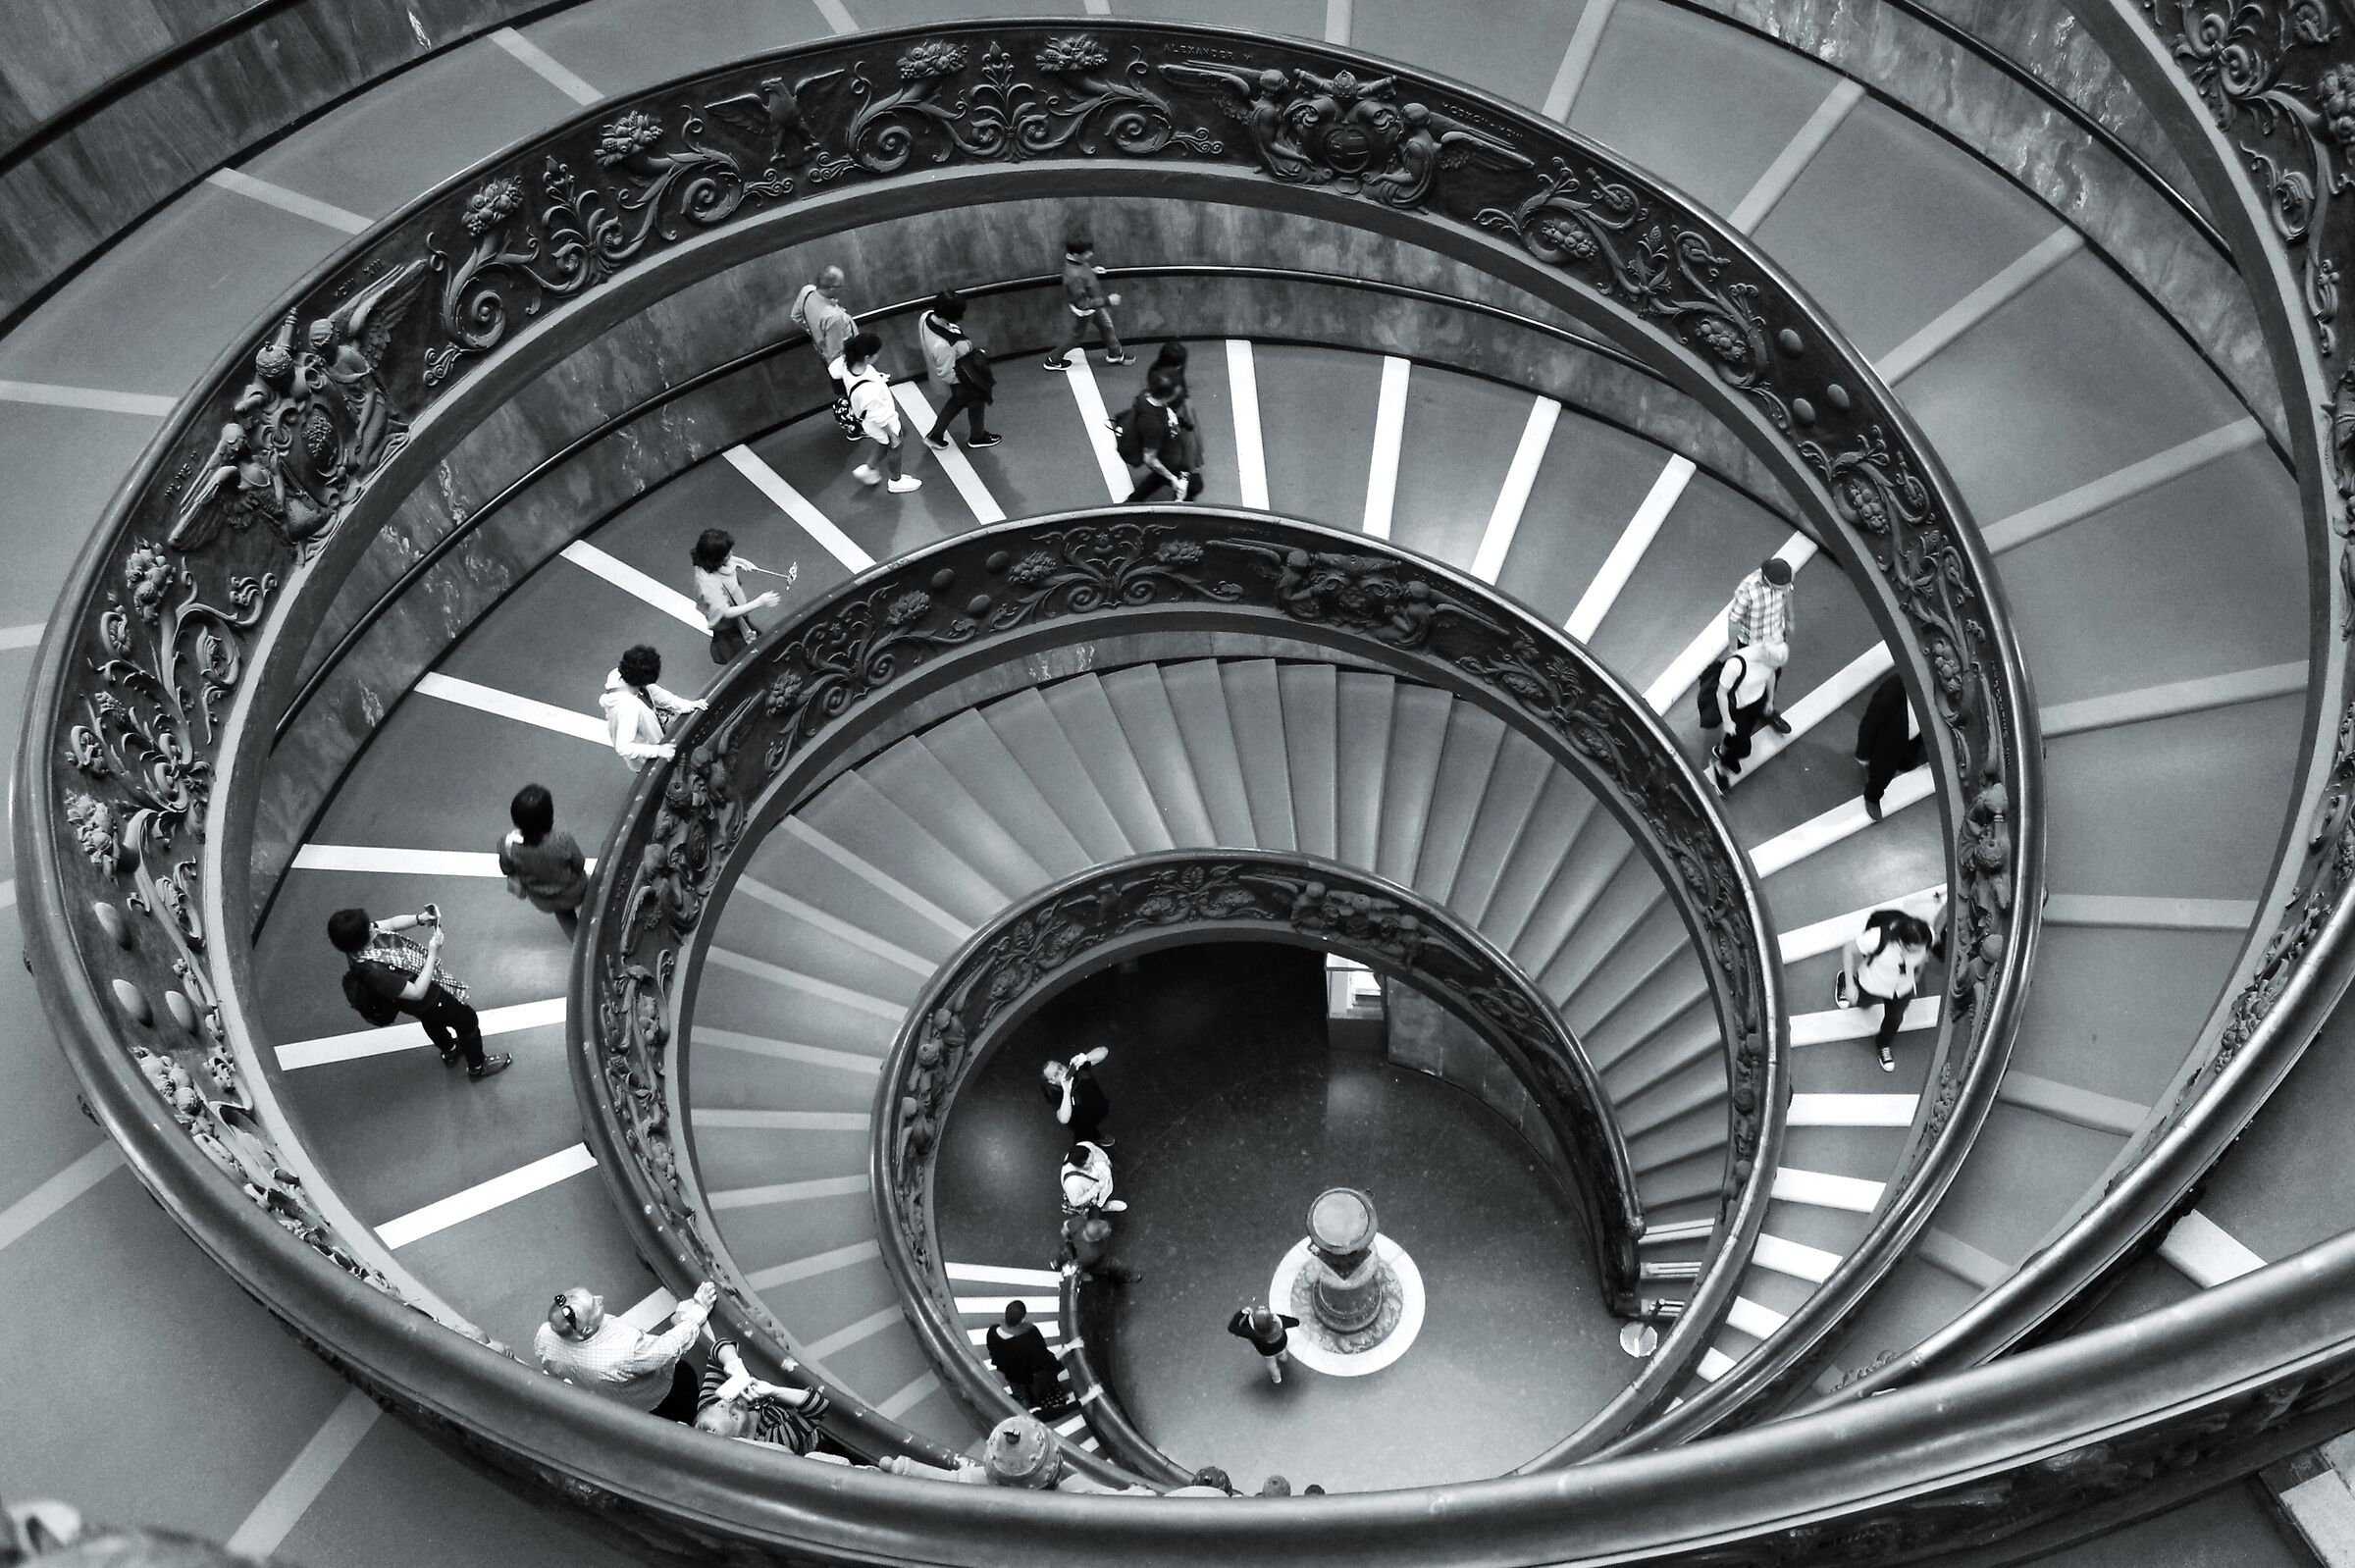 The helical staircase...